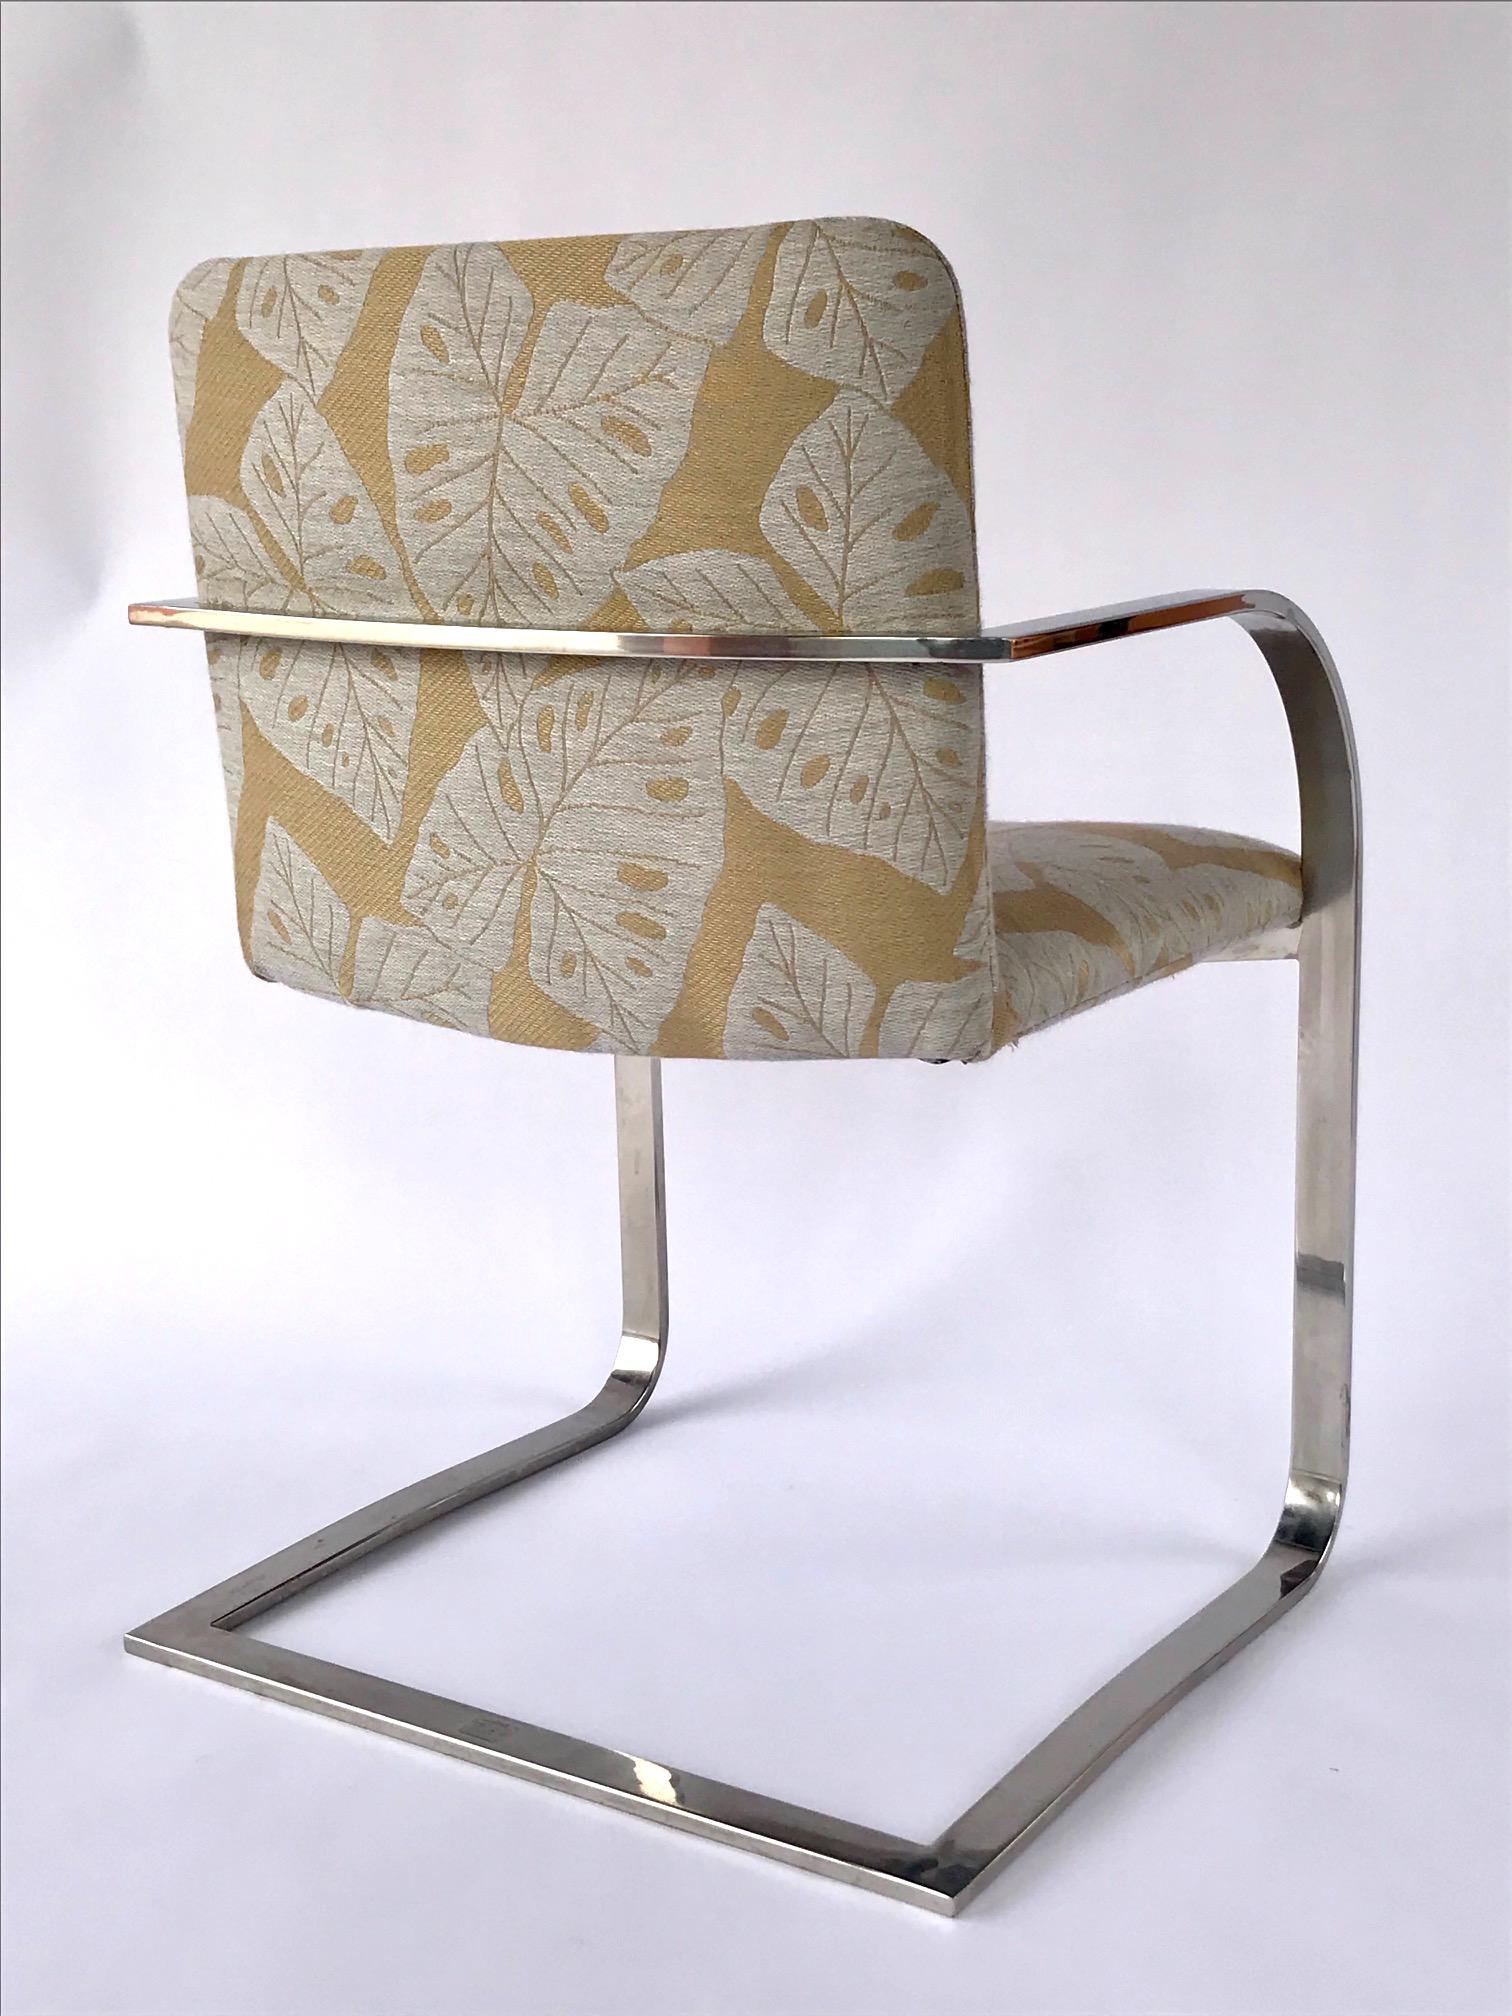 Pair of Mid-Century Modern Chrome Desk Chairs with Tropical Print by Brueton 3